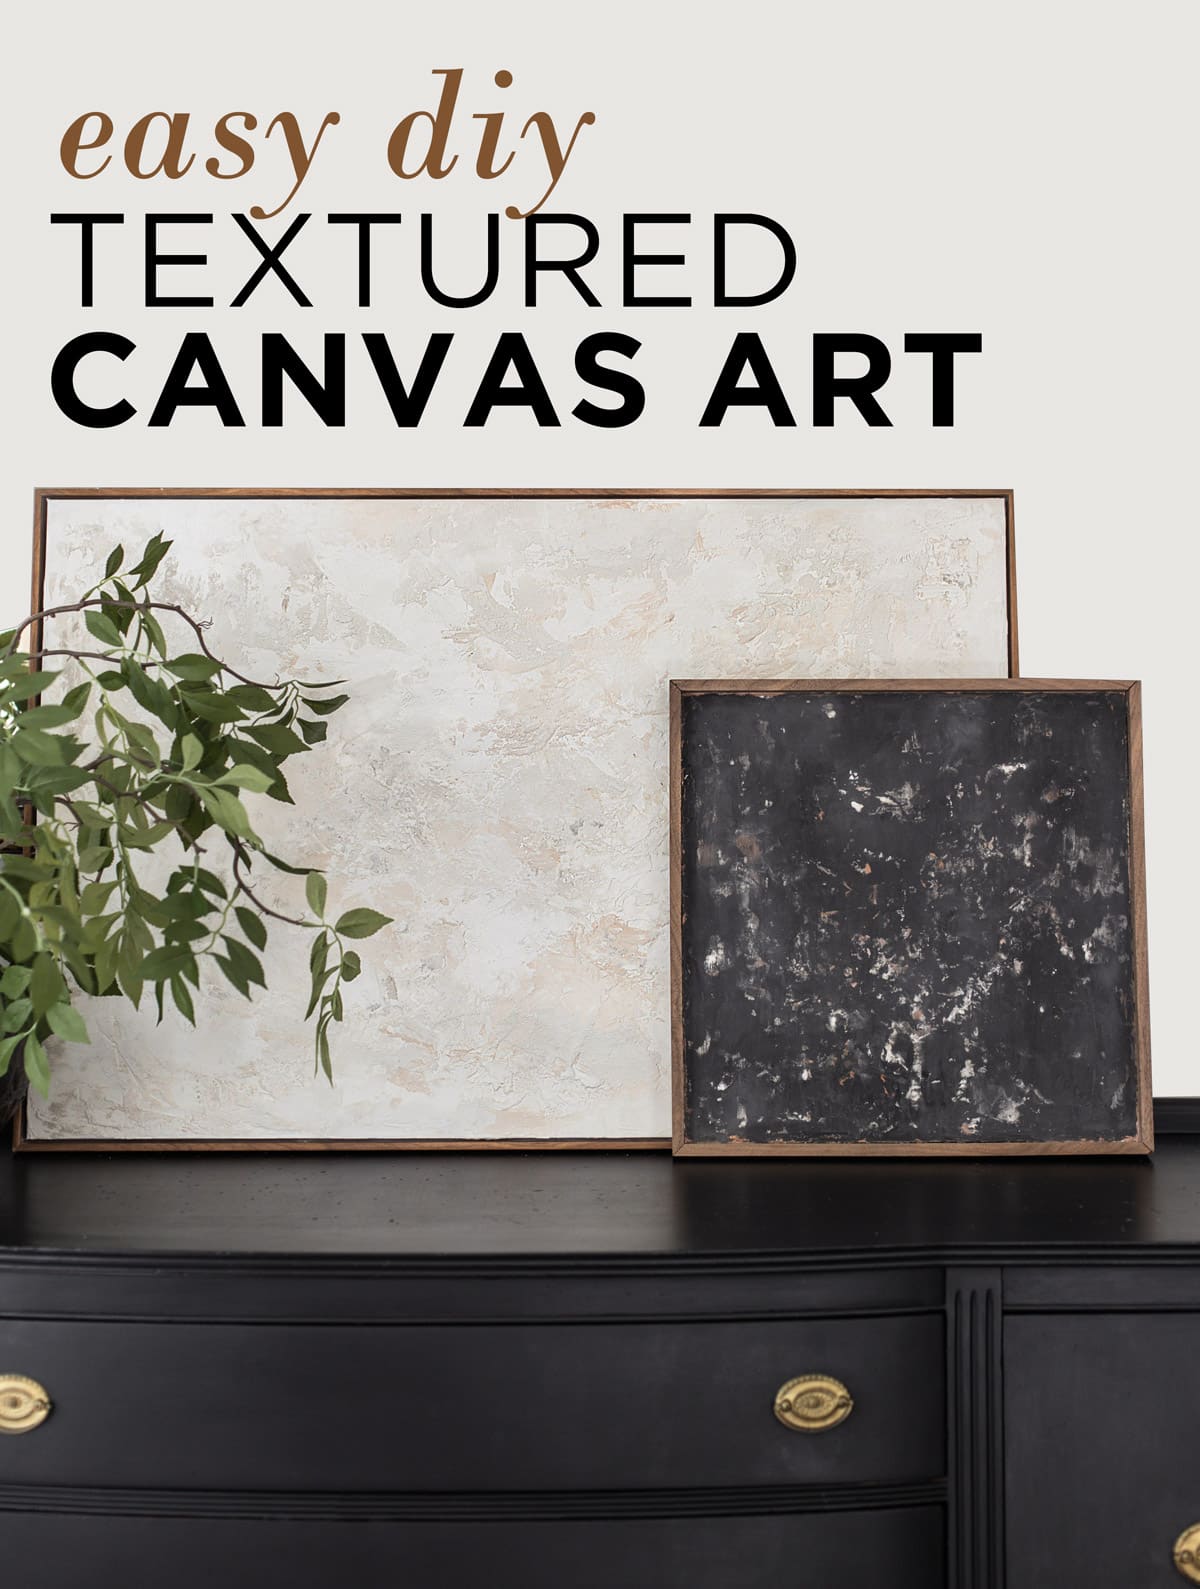 easy diy textured canvas art tutorial with plaster and joint compound